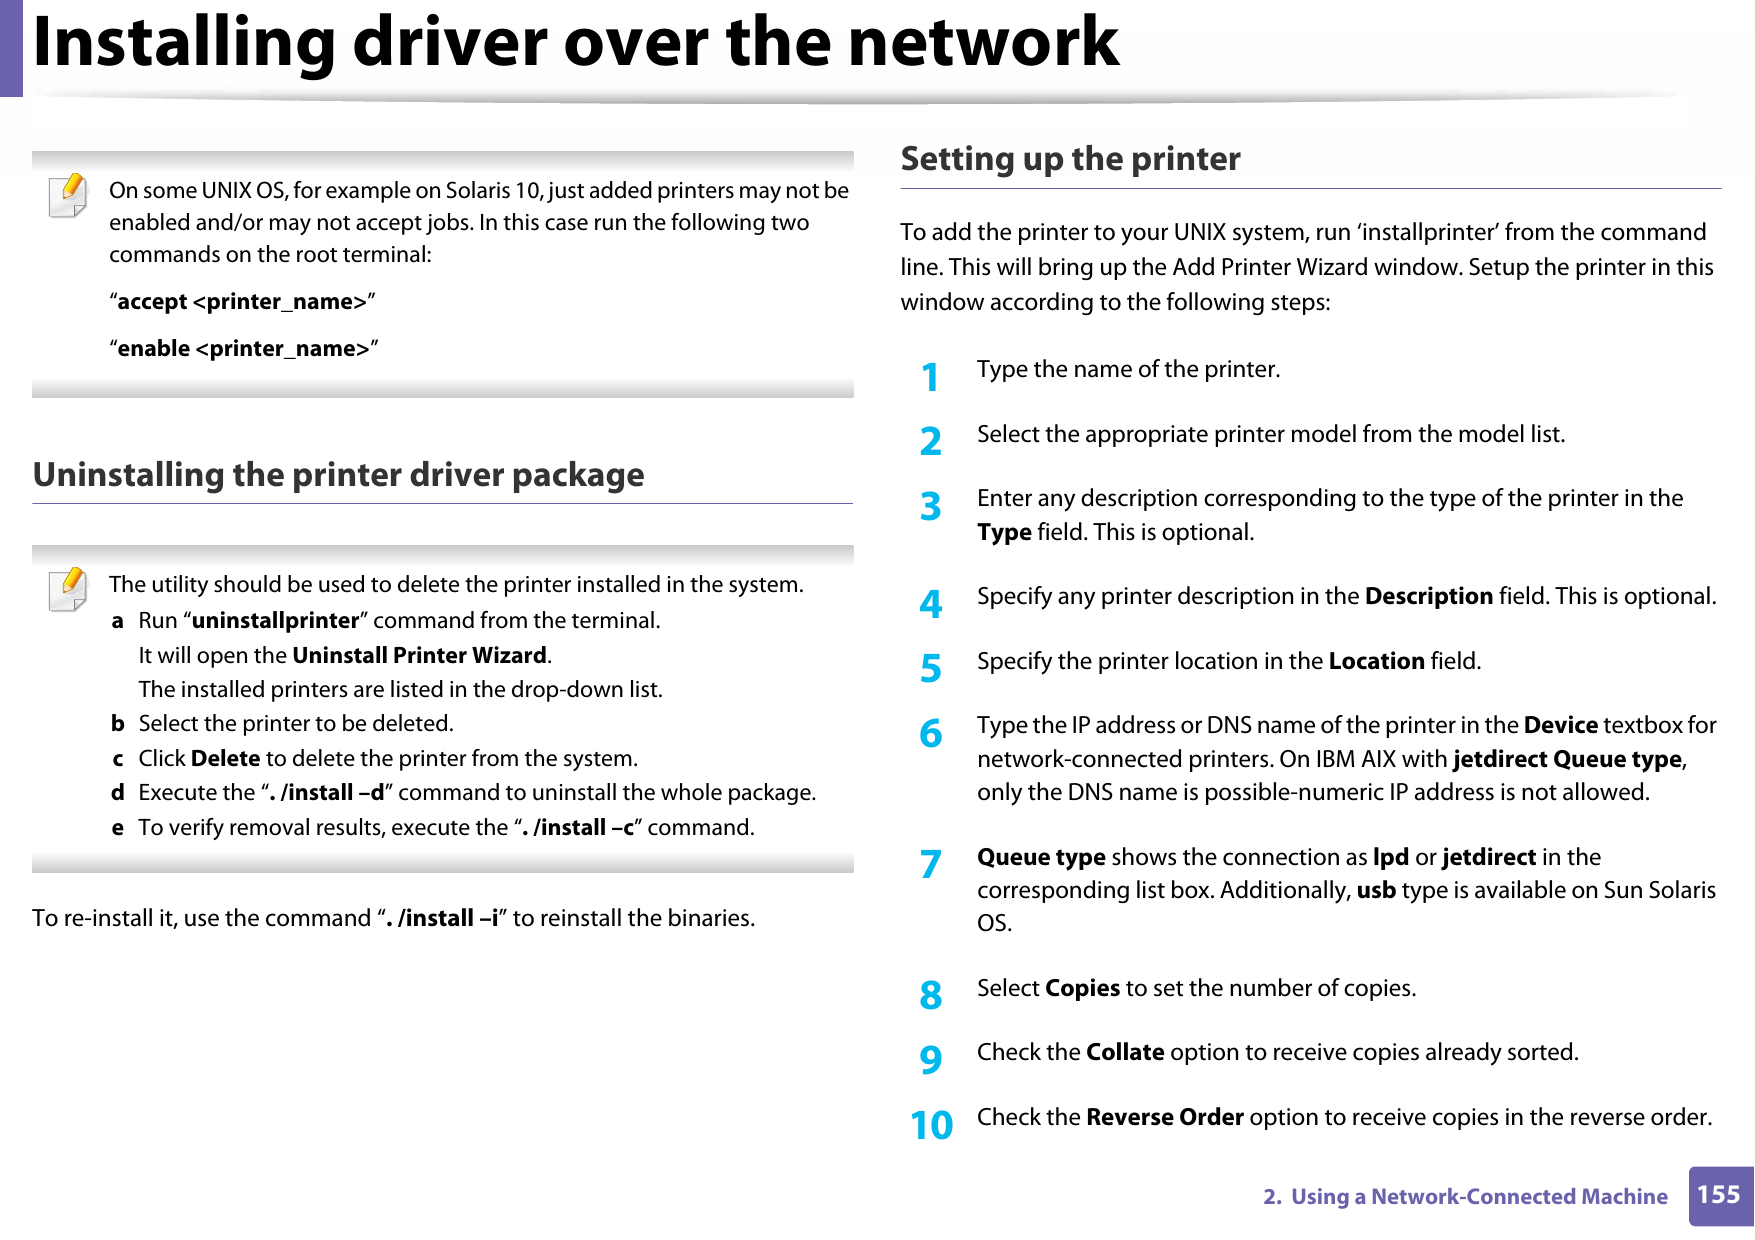 Installing driver over the network1552.  Using a Network-Connected Machine On some UNIX OS, for example on Solaris 10, just added printers may not be enabled and/or may not accept jobs. In this case run the following two commands on the root terminal:“accept &lt;printer_name&gt;”“enable &lt;printer_name&gt;” Uninstalling the printer driver package The utility should be used to delete the printer installed in the system.a  Run “uninstallprinter” command from the terminal.It will open the Uninstall Printer Wizard.The installed printers are listed in the drop-down list.b  Select the printer to be deleted.c  Click Delete to delete the printer from the system.d  Execute the “. /install –d” command to uninstall the whole package.e  To verify removal results, execute the “. /install –c” command. To re-install it, use the command “. /install –i” to reinstall the binaries.Setting up the printerTo add the printer to your UNIX system, run ‘installprinter’ from the command line. This will bring up the Add Printer Wizard window. Setup the printer in this window according to the following steps:1Type the name of the printer.2  Select the appropriate printer model from the model list.3  Enter any description corresponding to the type of the printer in the Type field. This is optional.4  Specify any printer description in the Description field. This is optional.5  Specify the printer location in the Location field.6  Type the IP address or DNS name of the printer in the Device textbox for network-connected printers. On IBM AIX with jetdirect Queue type, only the DNS name is possible-numeric IP address is not allowed.7  Queue type shows the connection as lpd or jetdirect in the corresponding list box. Additionally, usb type is available on Sun Solaris OS.8  Select Copies to set the number of copies.9  Check the Collate option to receive copies already sorted.10  Check the Reverse Order option to receive copies in the reverse order.